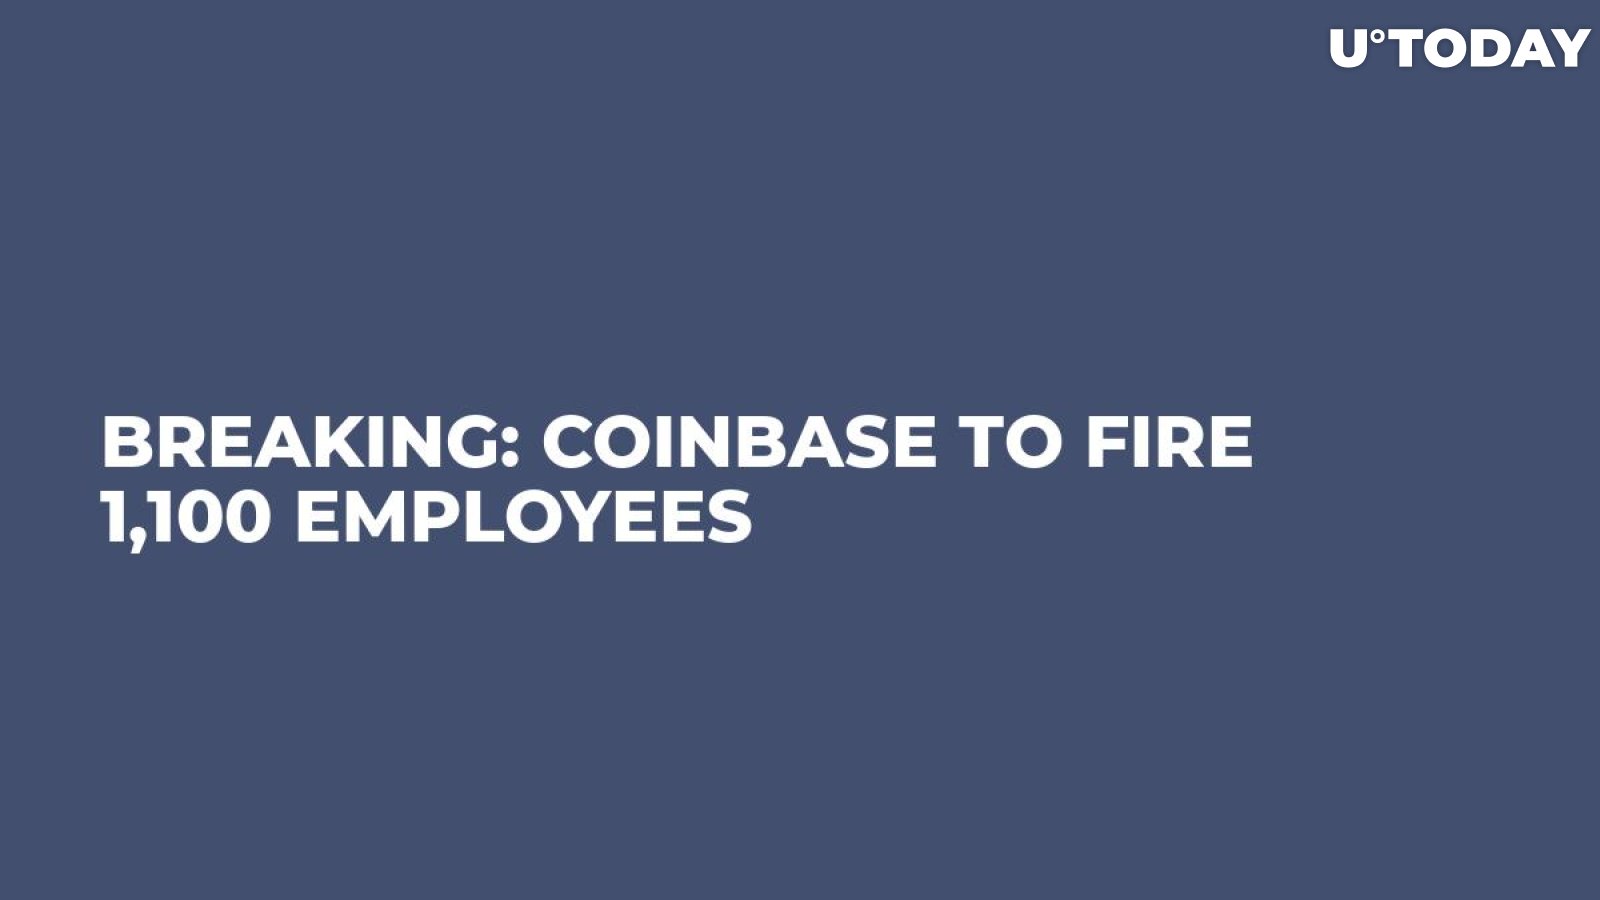 BREAKING: Coinbase to Fire 1,100 Employees 